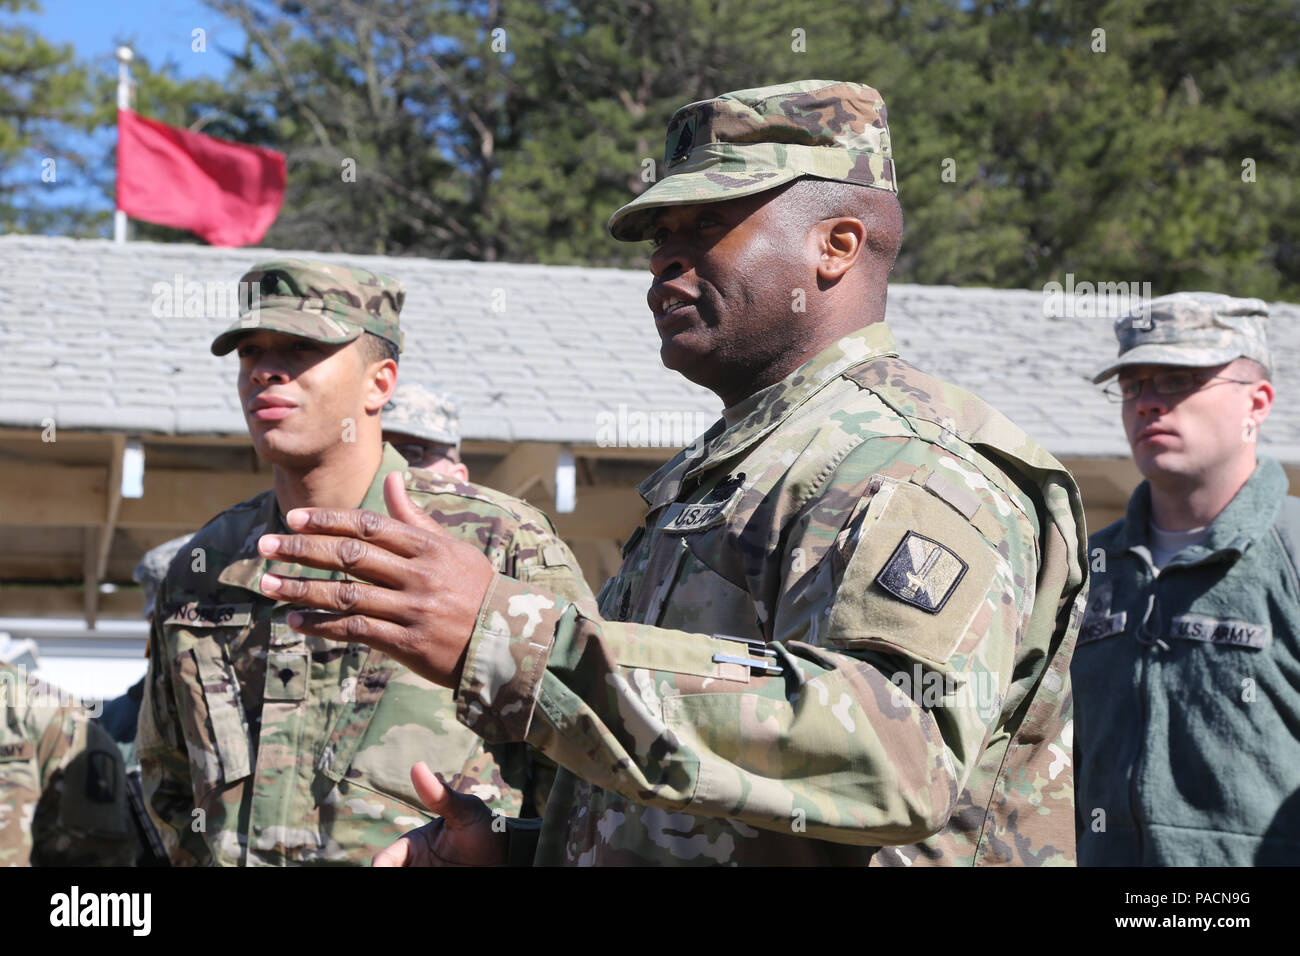 U.S. Army Command Sgt. Maj. Timothy Coleman, assigned to 114th Signal Battalion, speaks on behalf of Sgt. Samuel Nobles promotion at Fort George G. Meade, Md., March 2, 2016. The promotion from specialist to sergeant marks the responsibility instilled into the new noncommissioned officer. (U.S. Army photo by Spc. Alyssa Madero/Released) Stock Photo